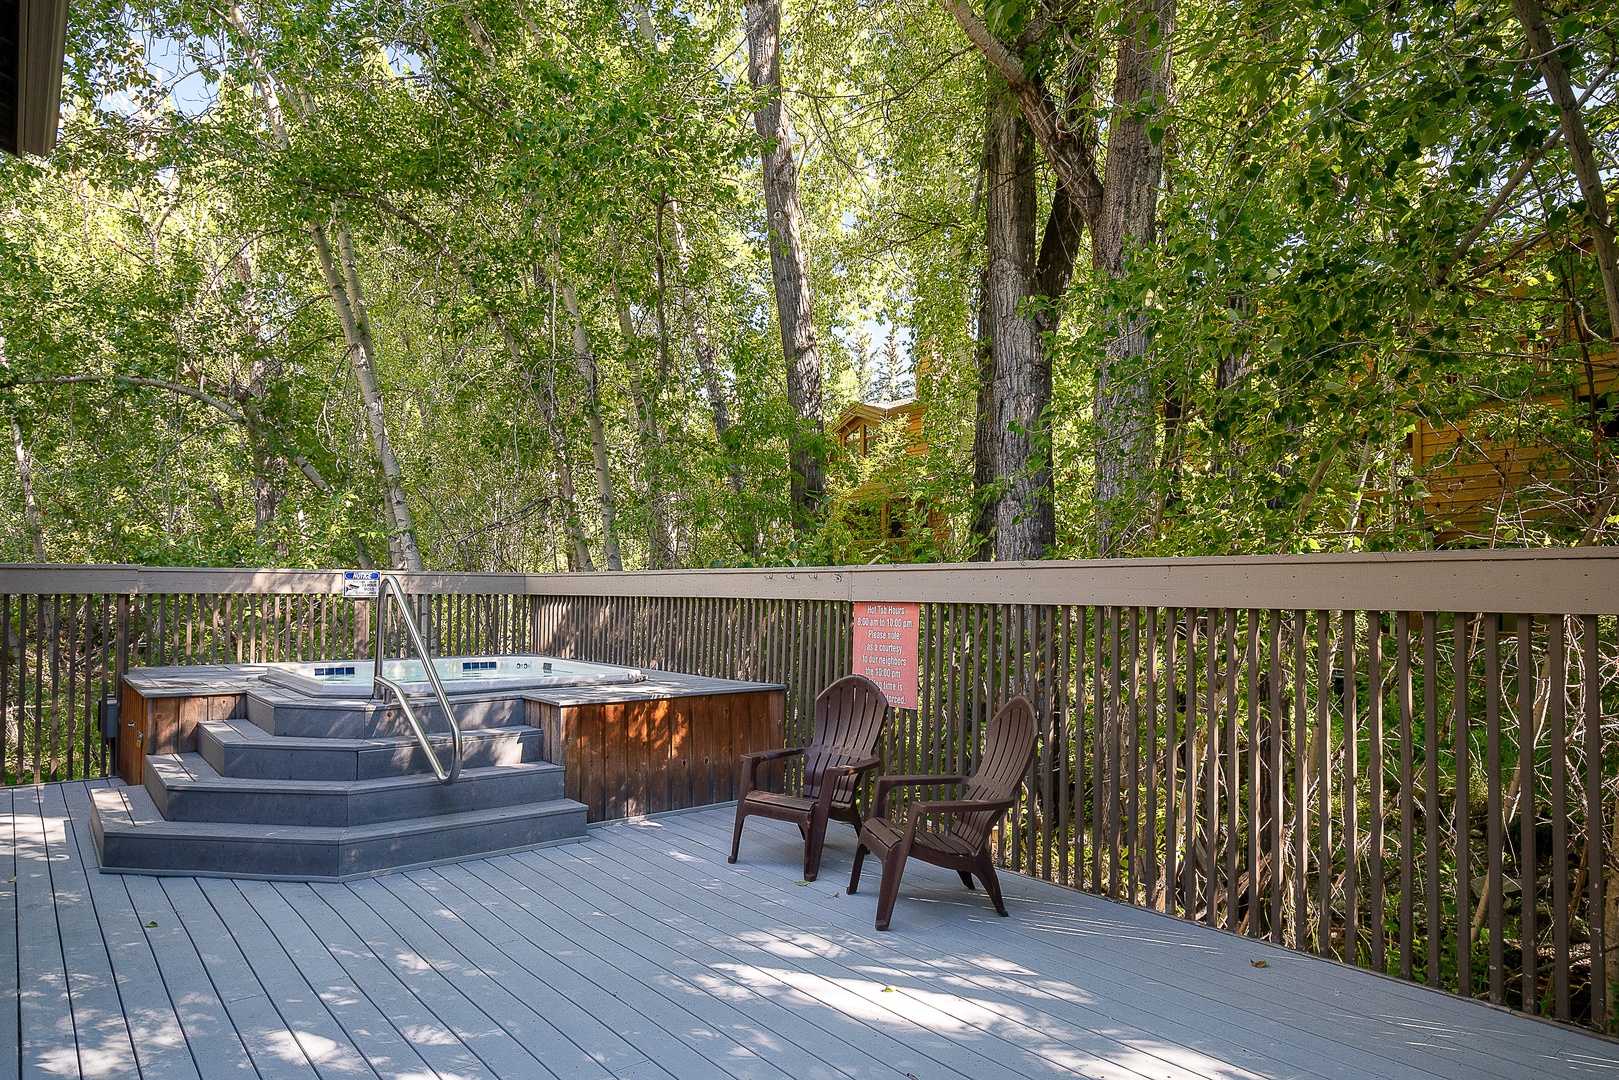 Ketchum Vacation Rentals, Bridgepoint Charm - Sit back in the Adirondack chairs and enjoy the natural beauty of the area or take a dip in the hot tub